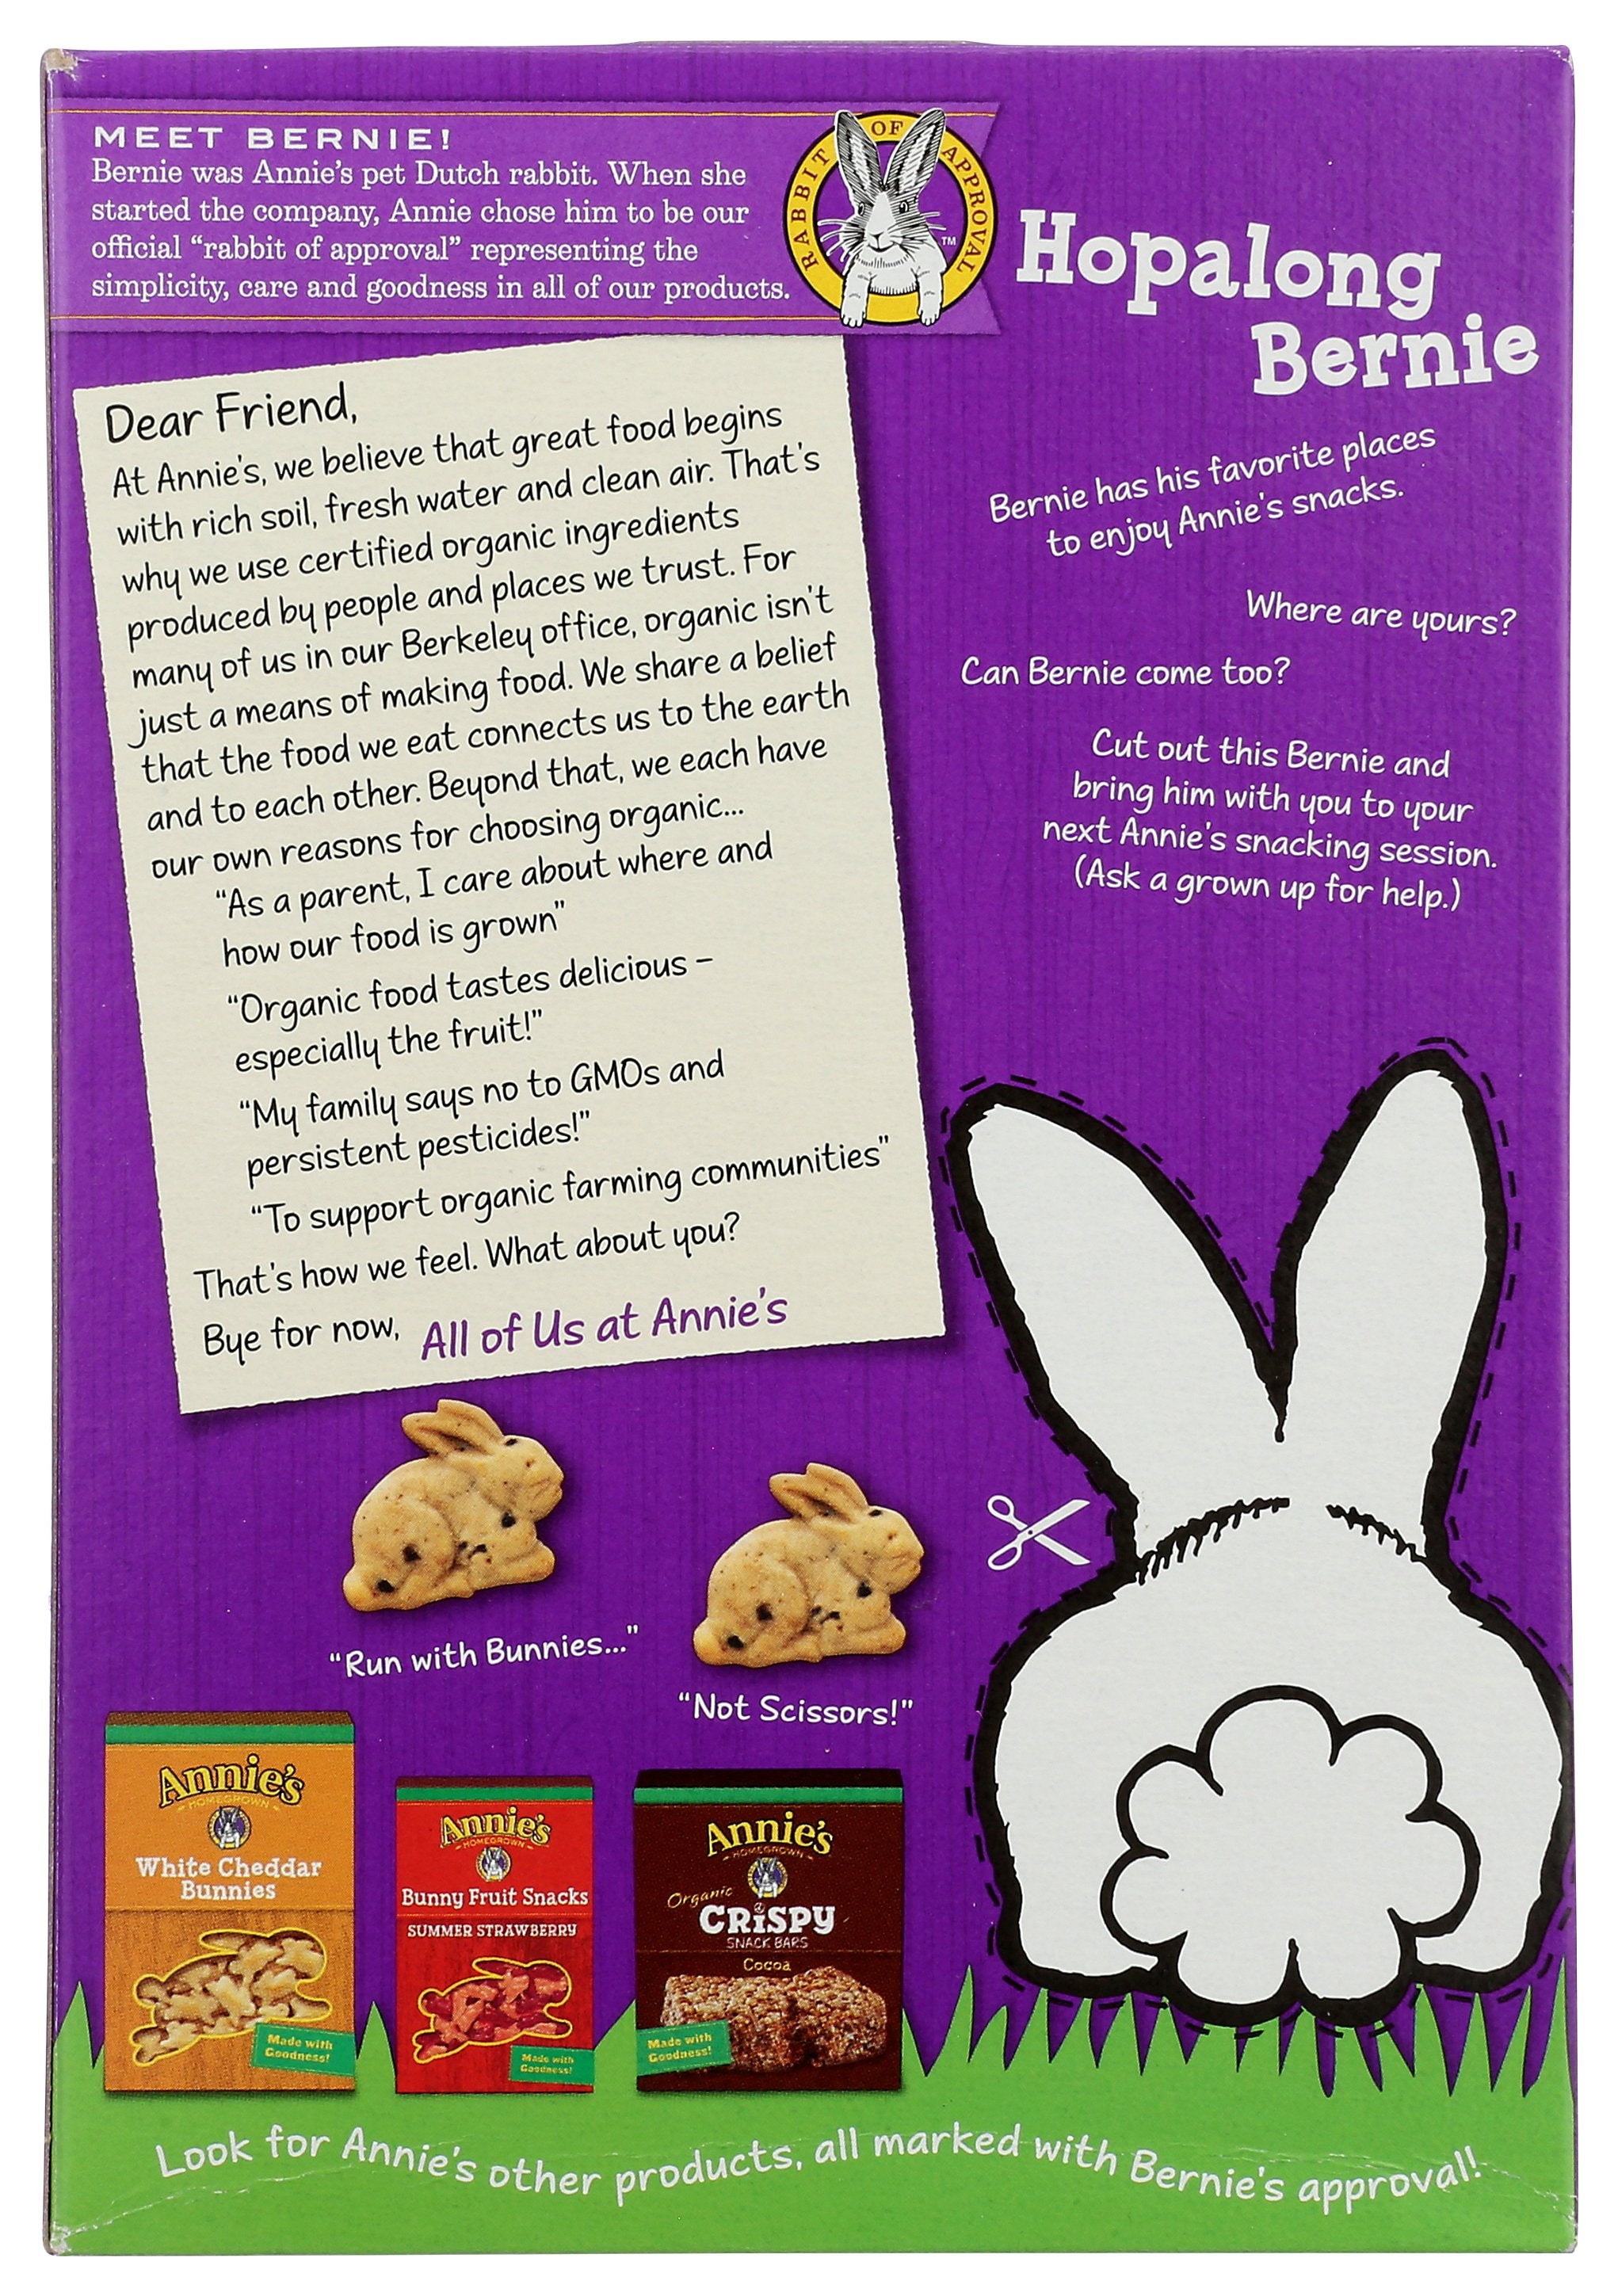 ANNIES HOMEGROWN COOKIE BUNNY GRAHAM CHCHIP - Case of 3